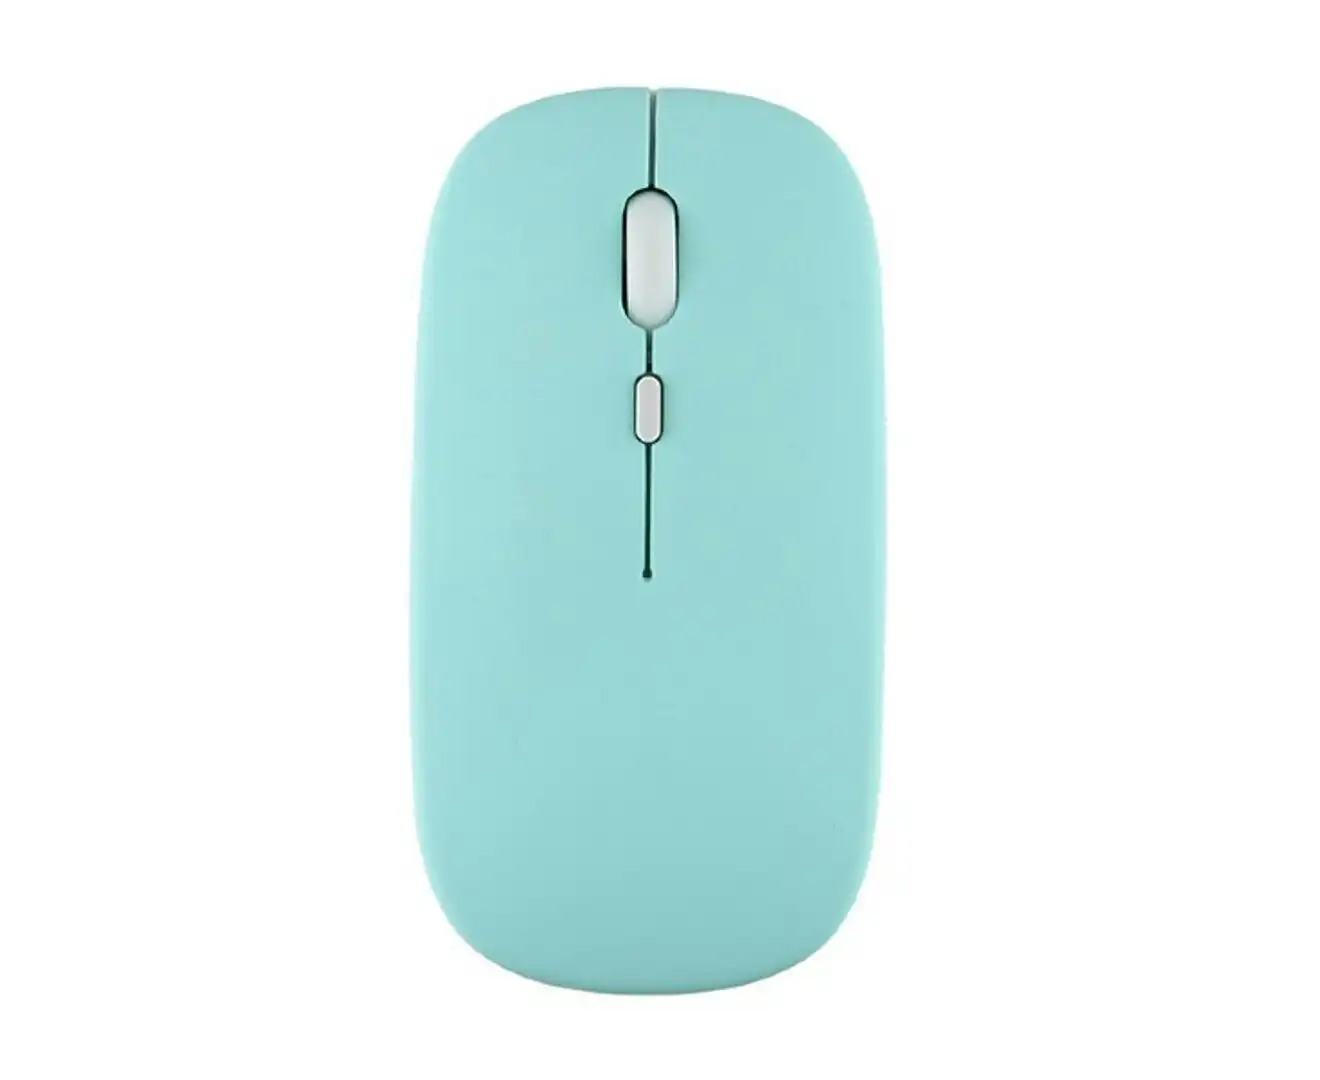 Dual Mode Bluetooth + 2.4GHz Wireless Mouse Standalone for Tablets, Smartphones, PCs, Mint